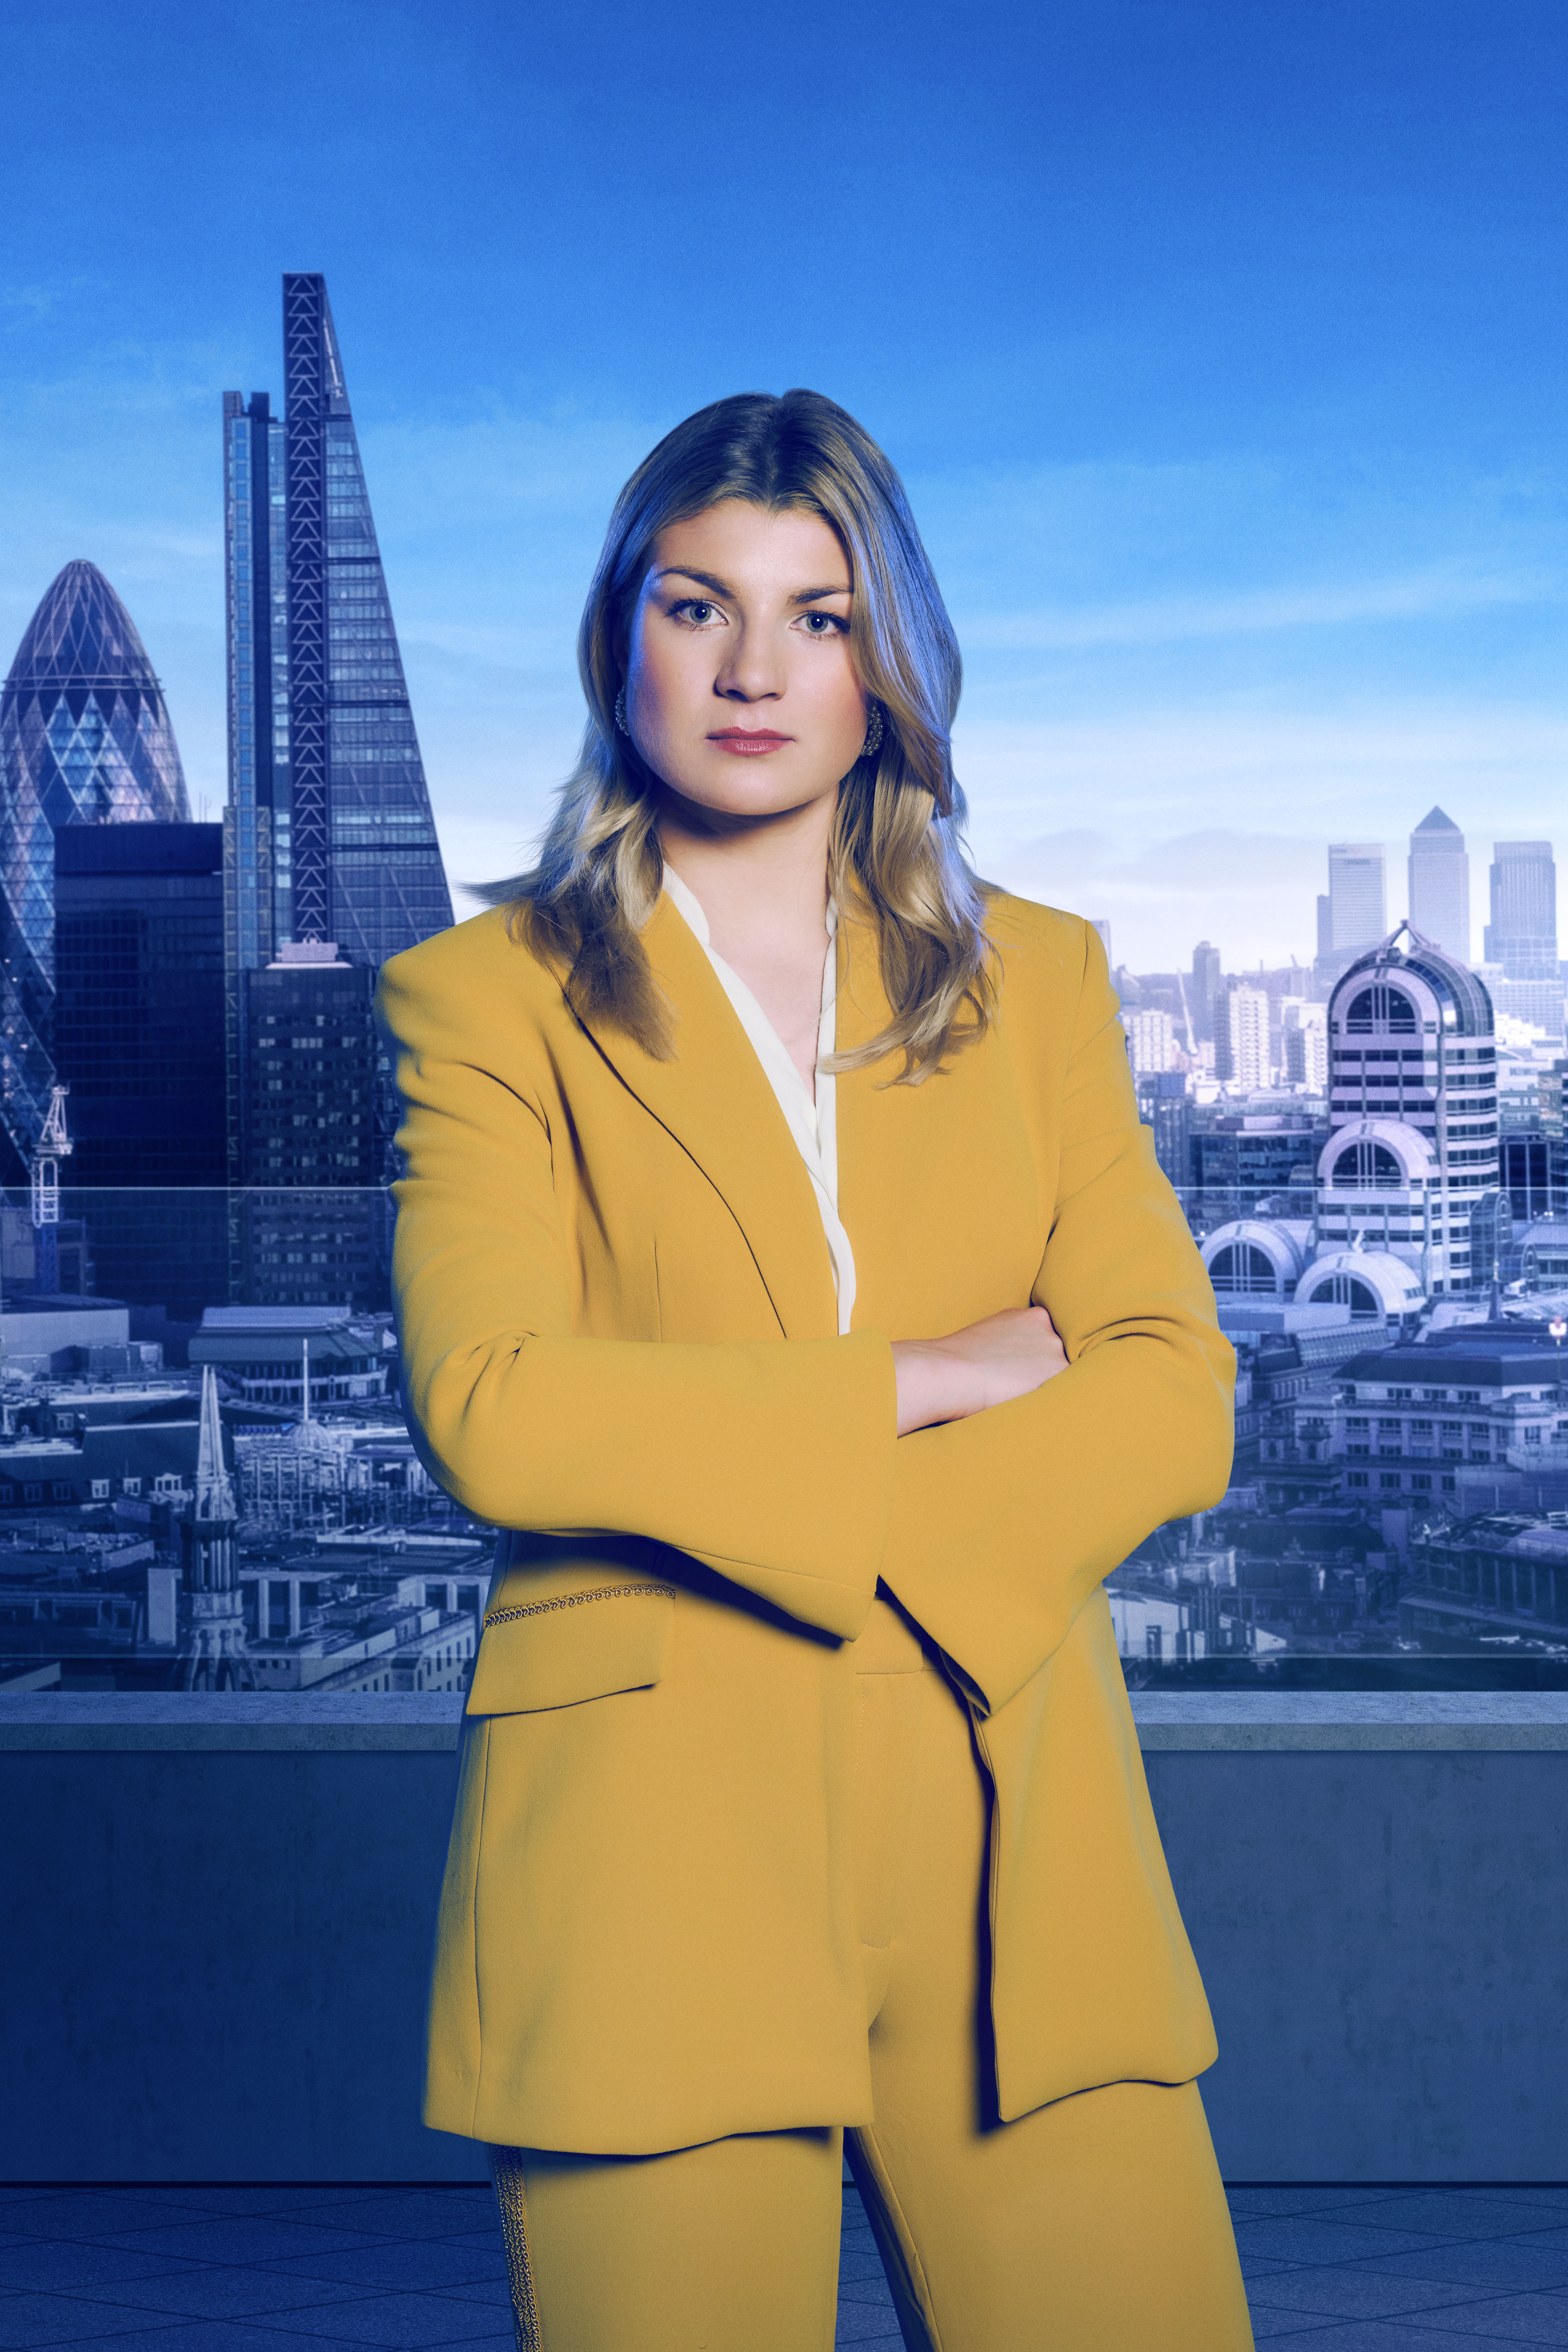 Flo has admitted to "failing" every single day - can she survive the boardroom?